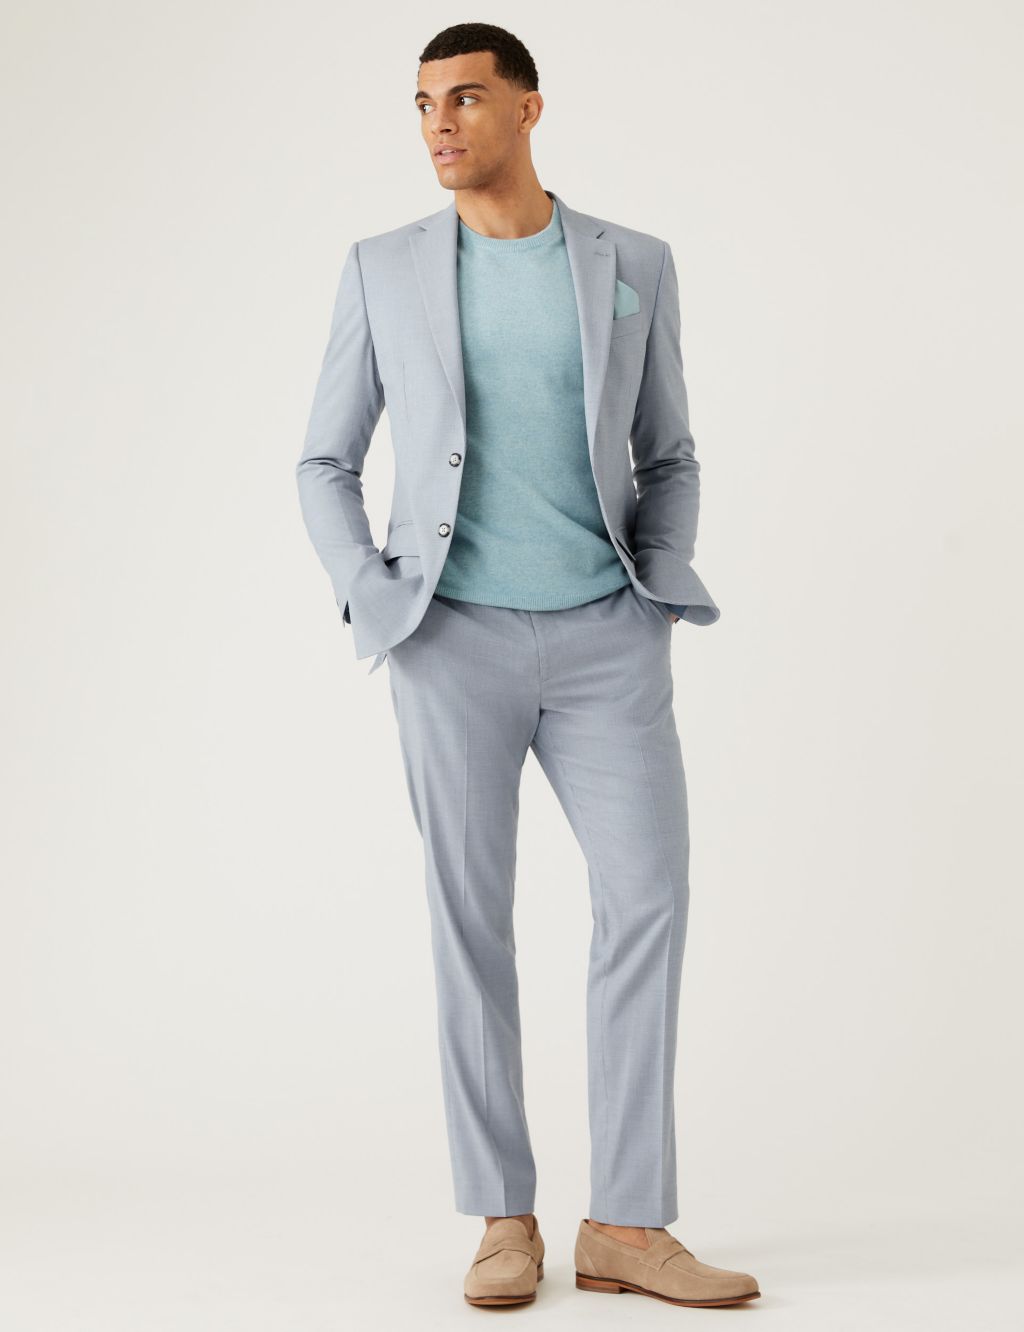 Slim Fit Puppytooth Suit image 6